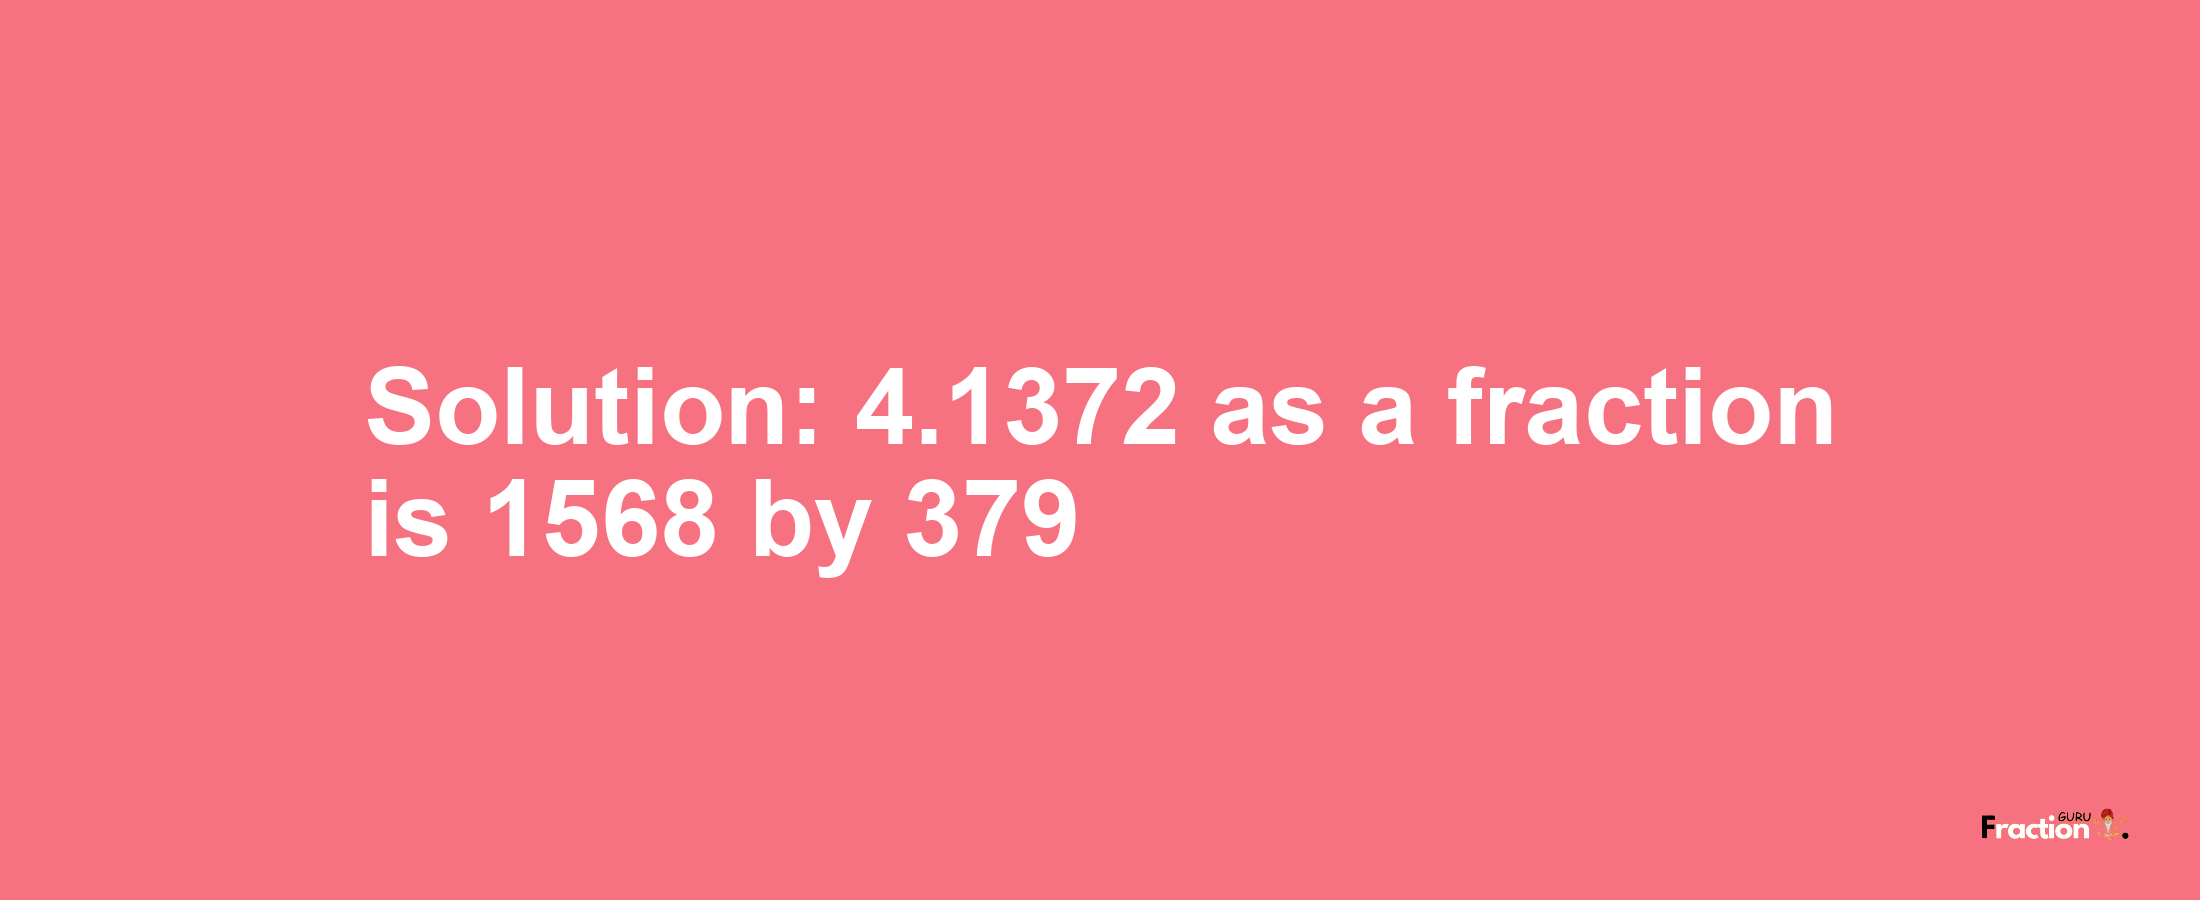 Solution:4.1372 as a fraction is 1568/379